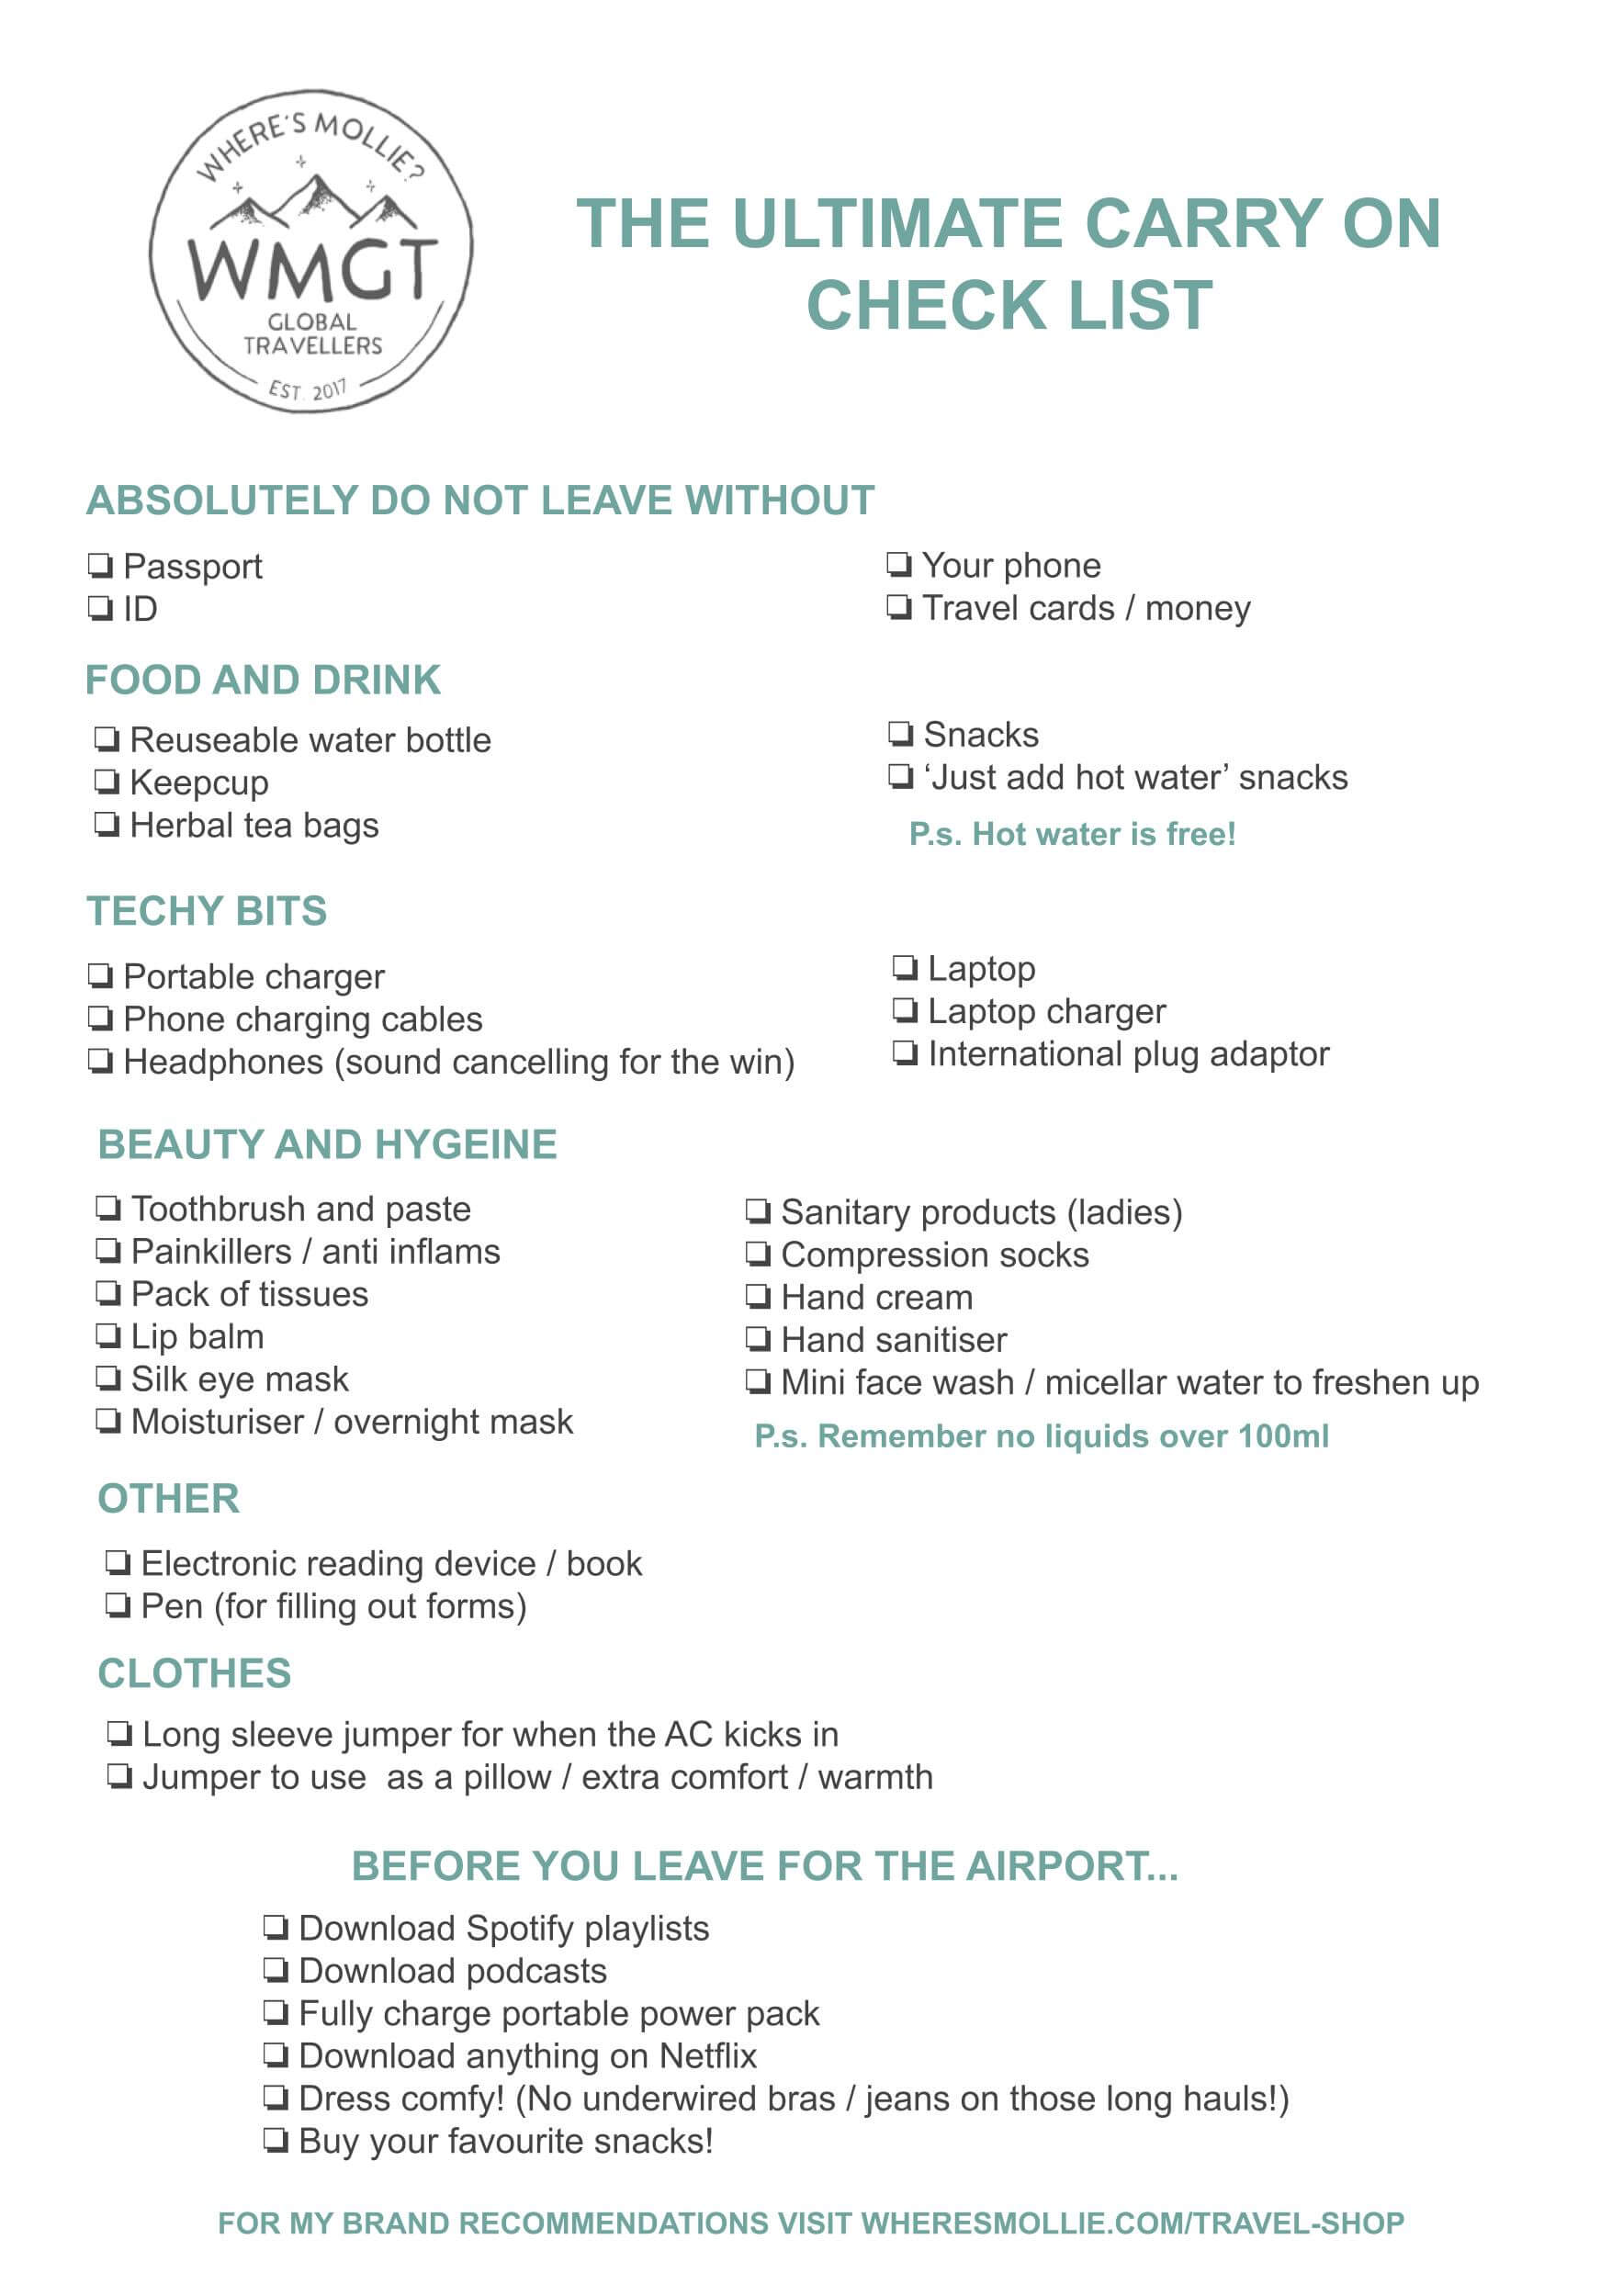 The ultimate carry on packing guide and checklist